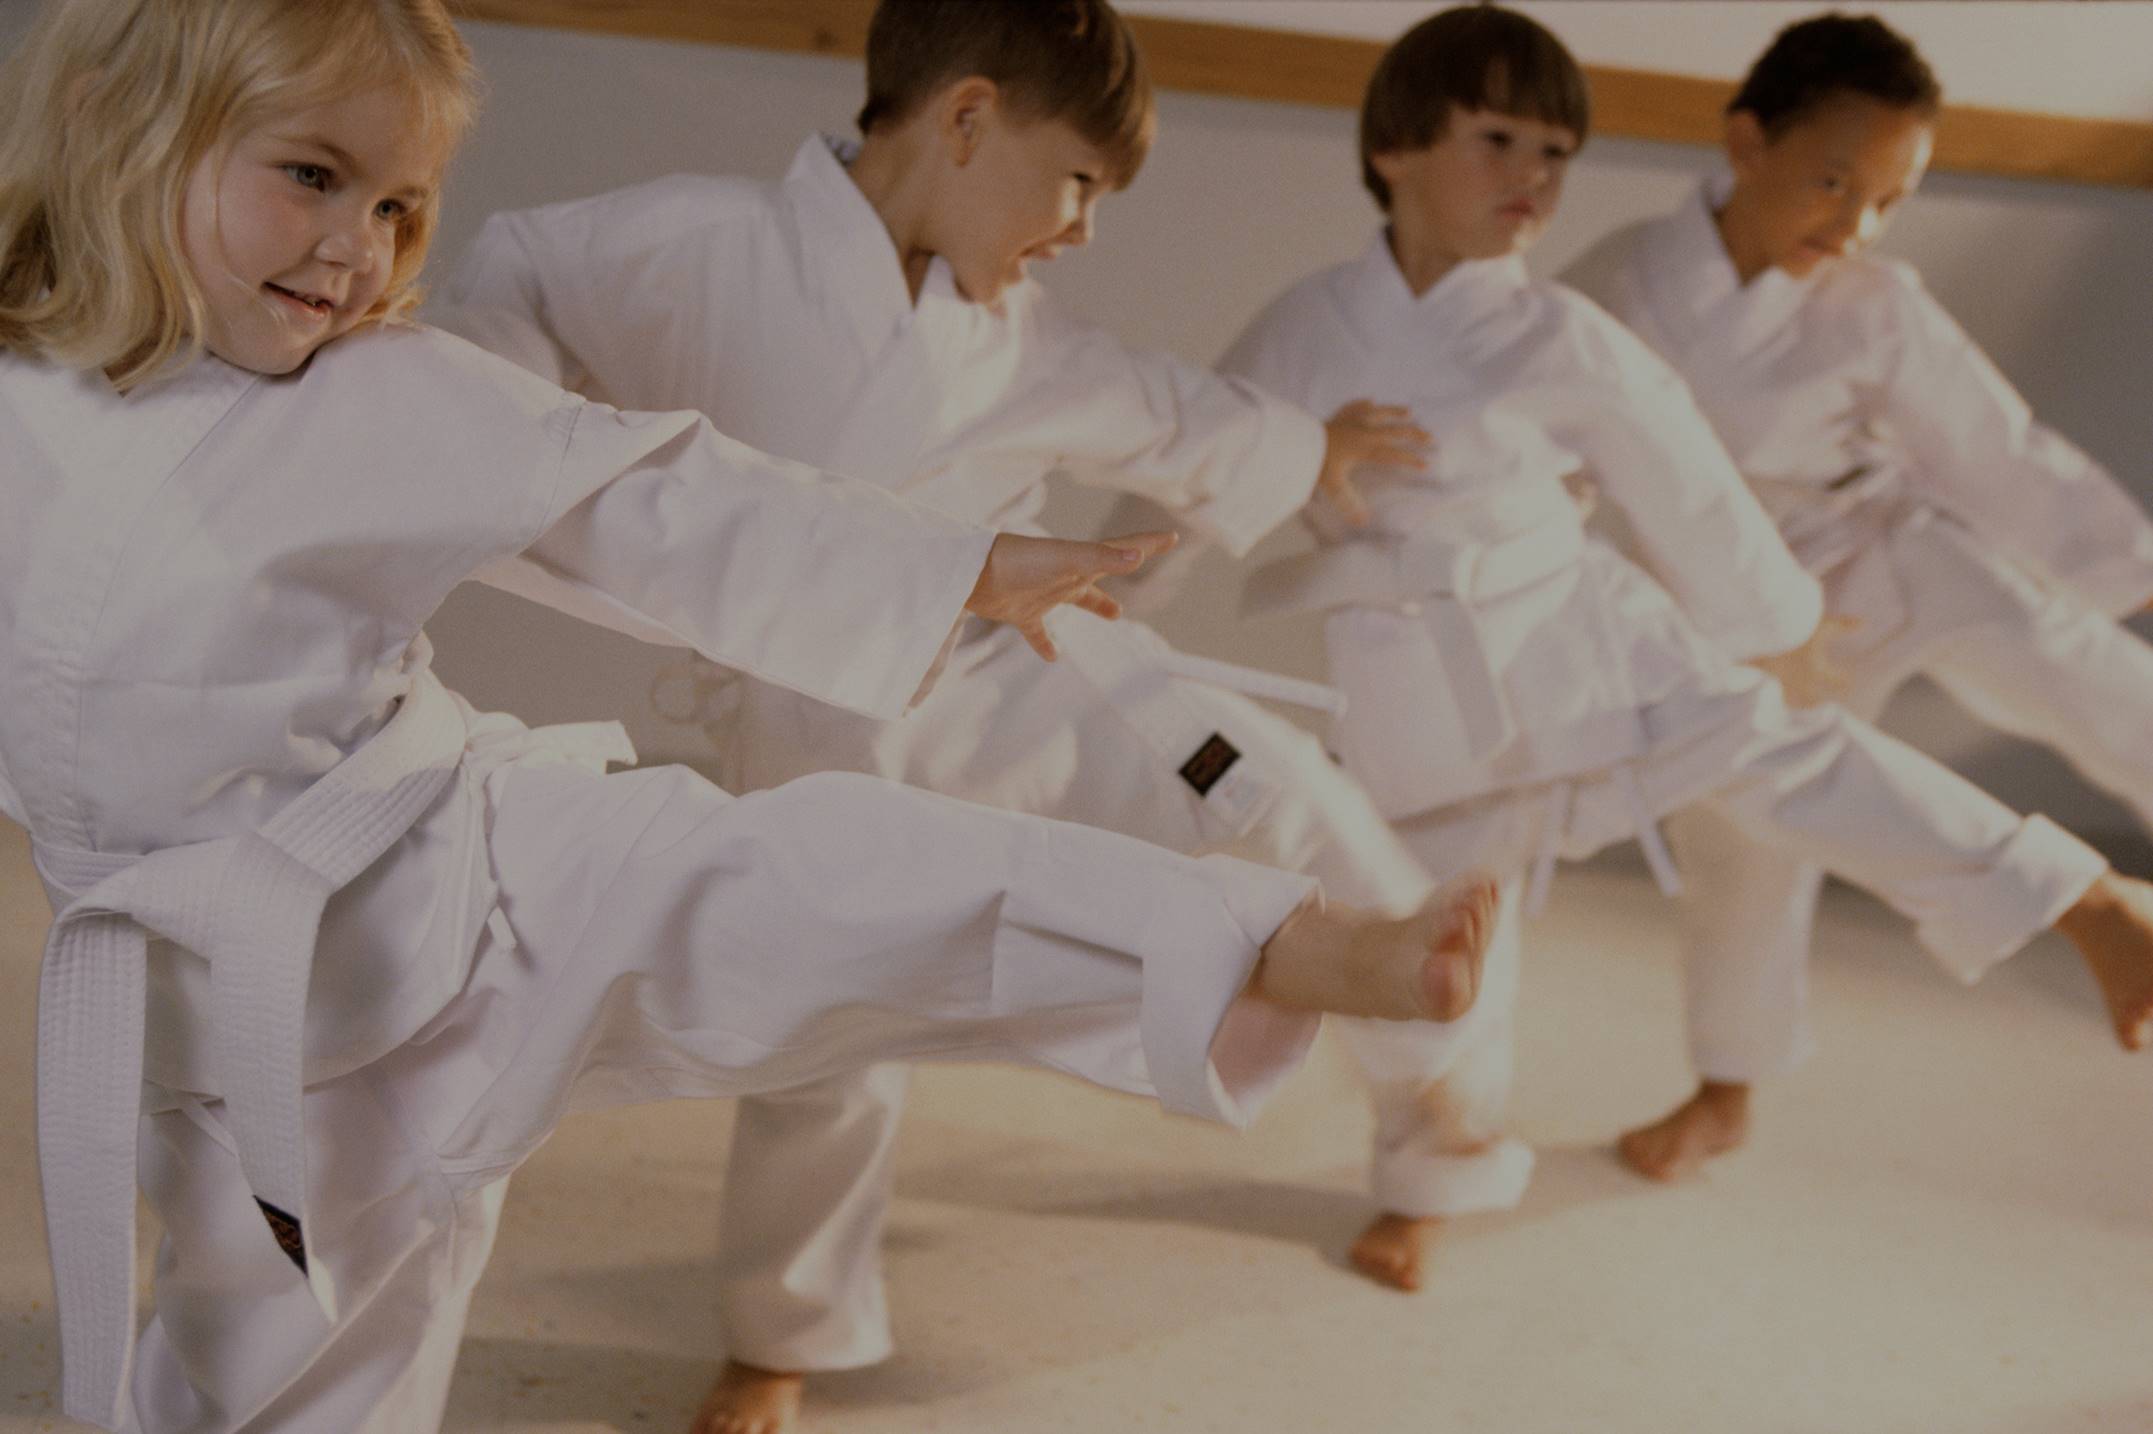 A group of people in white karate uniforms

Description automatically generated with medium confidence